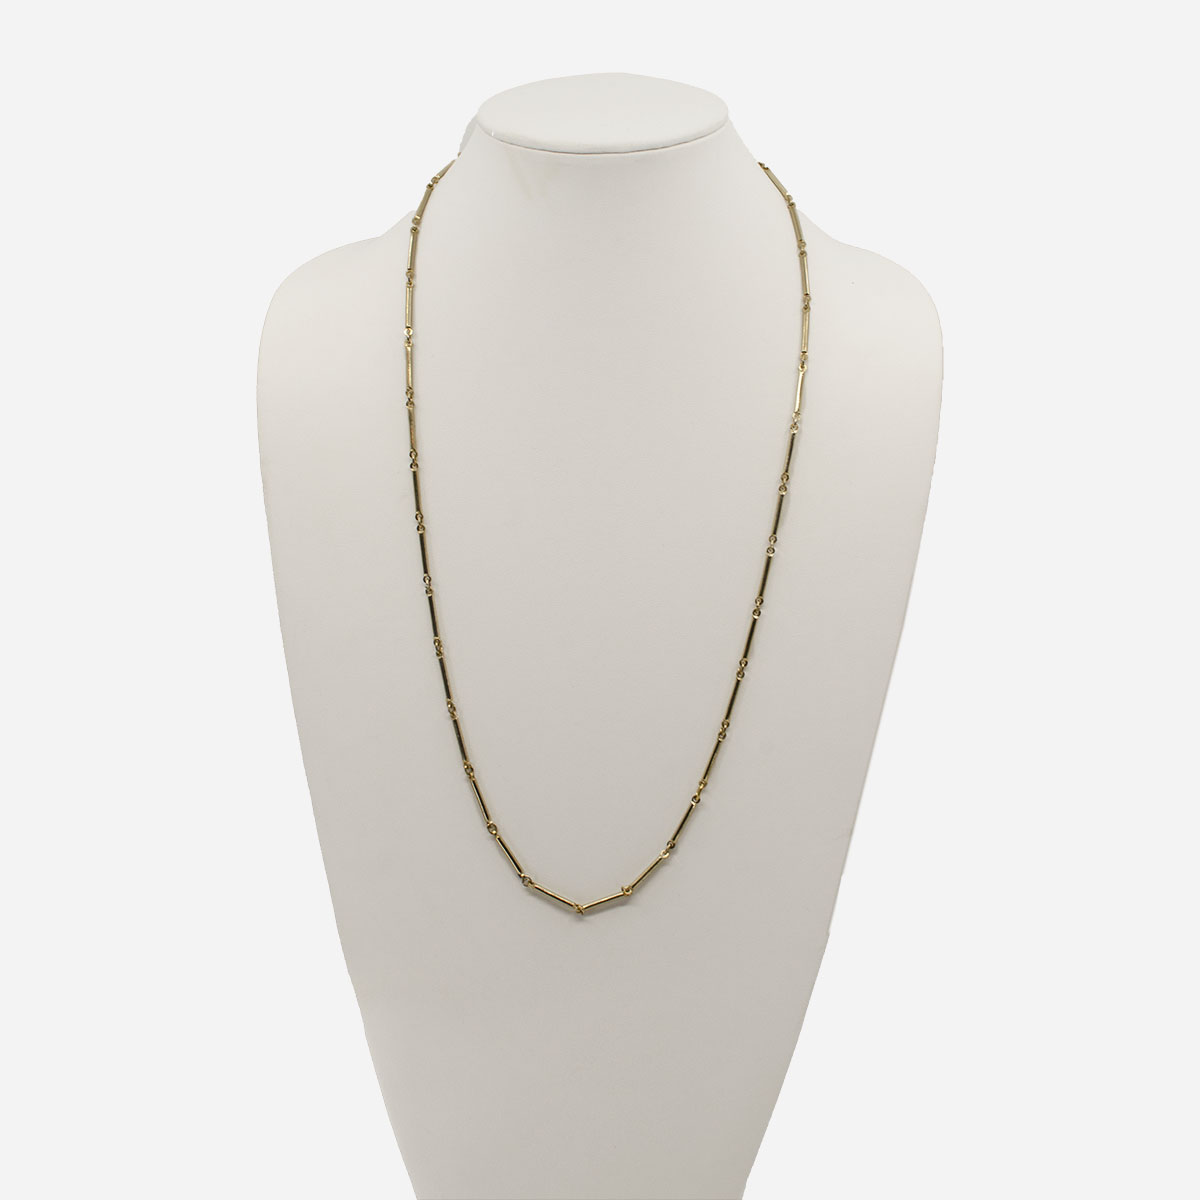 Tube link chain necklace